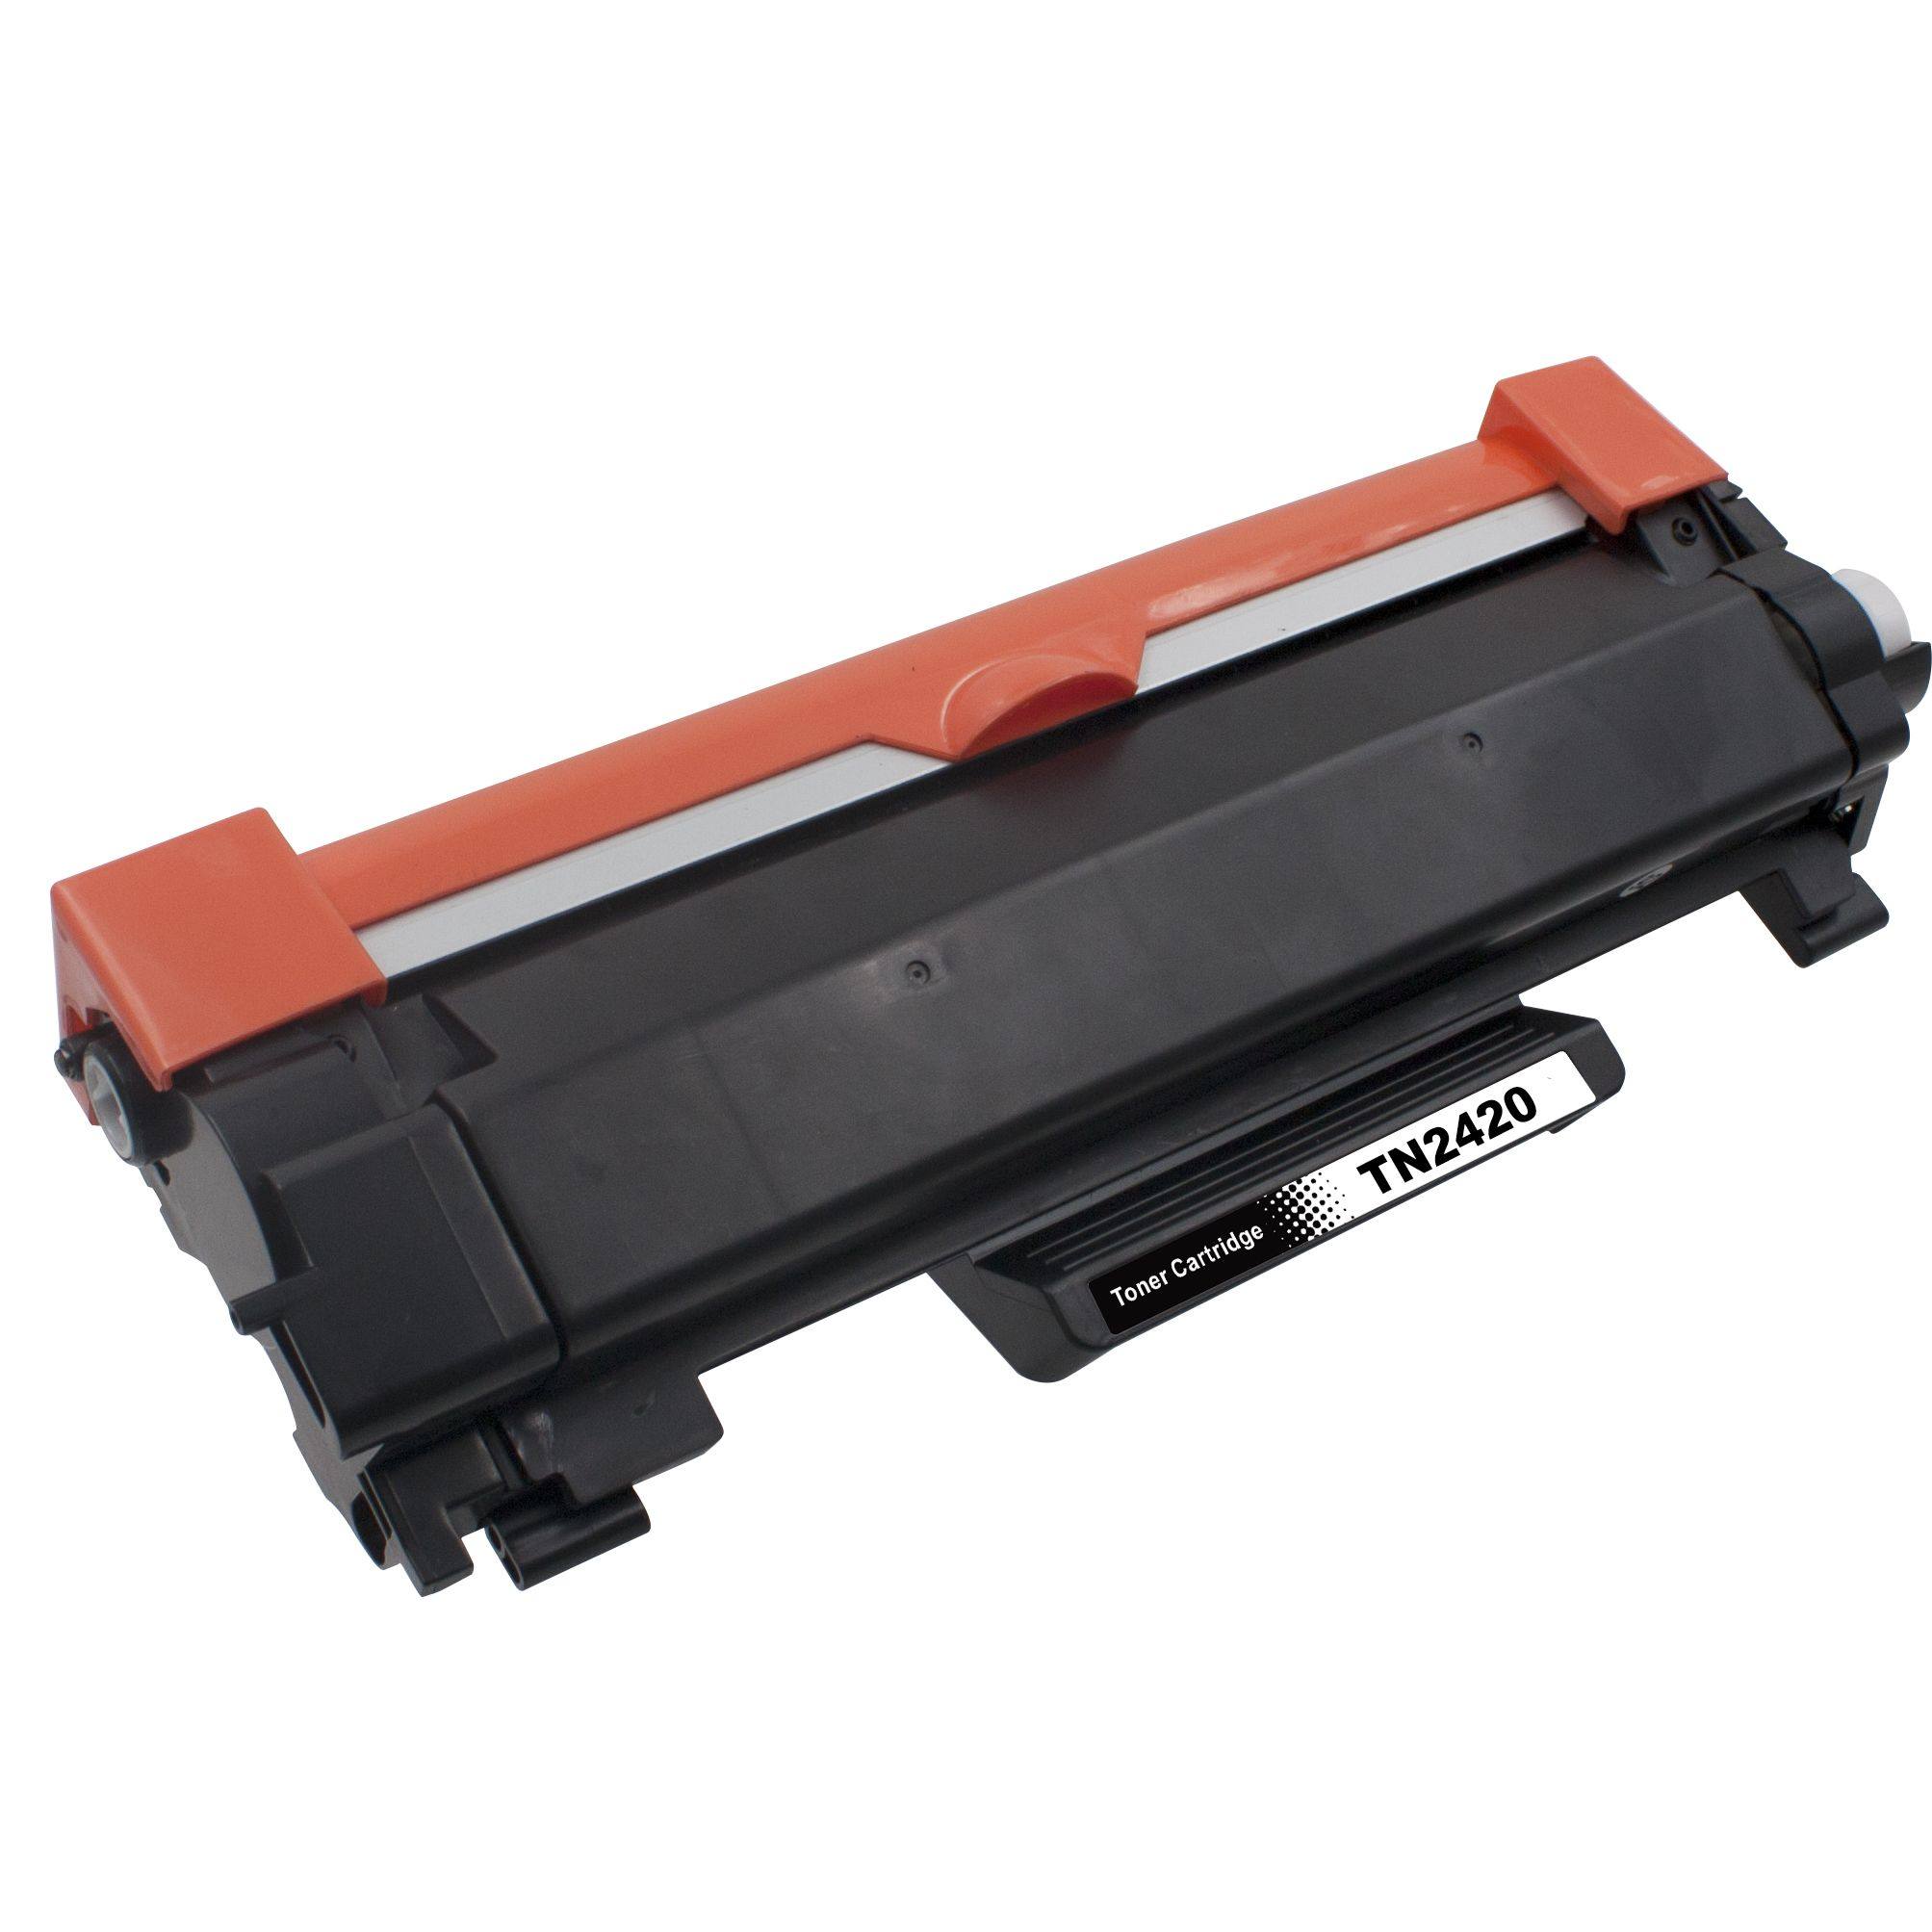 Brother TN-2420 Συμβατό Τόνερ Black (3.000 σελίδες) για Brother DCP-L 2510  D, -L 2530 DW, Brother HL-L 2350 DW and Brother MFC-L 